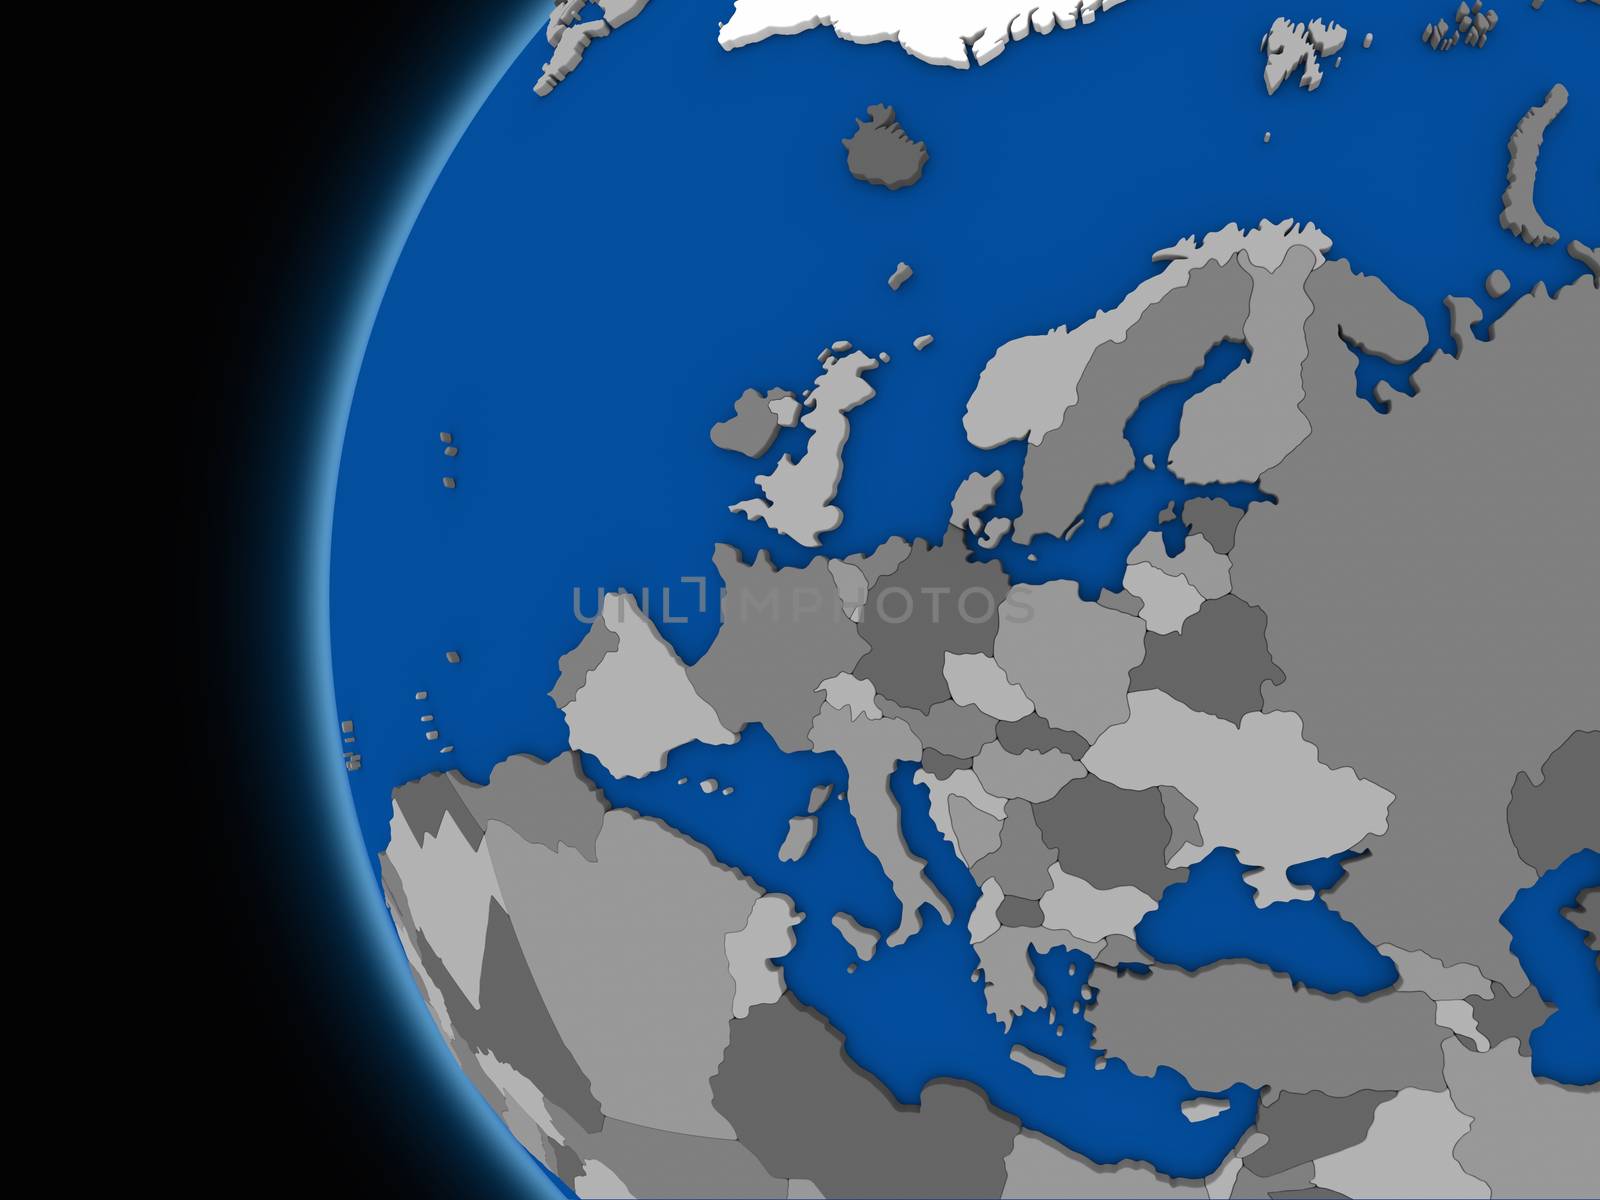 Illustration of European continent on political globe with black background